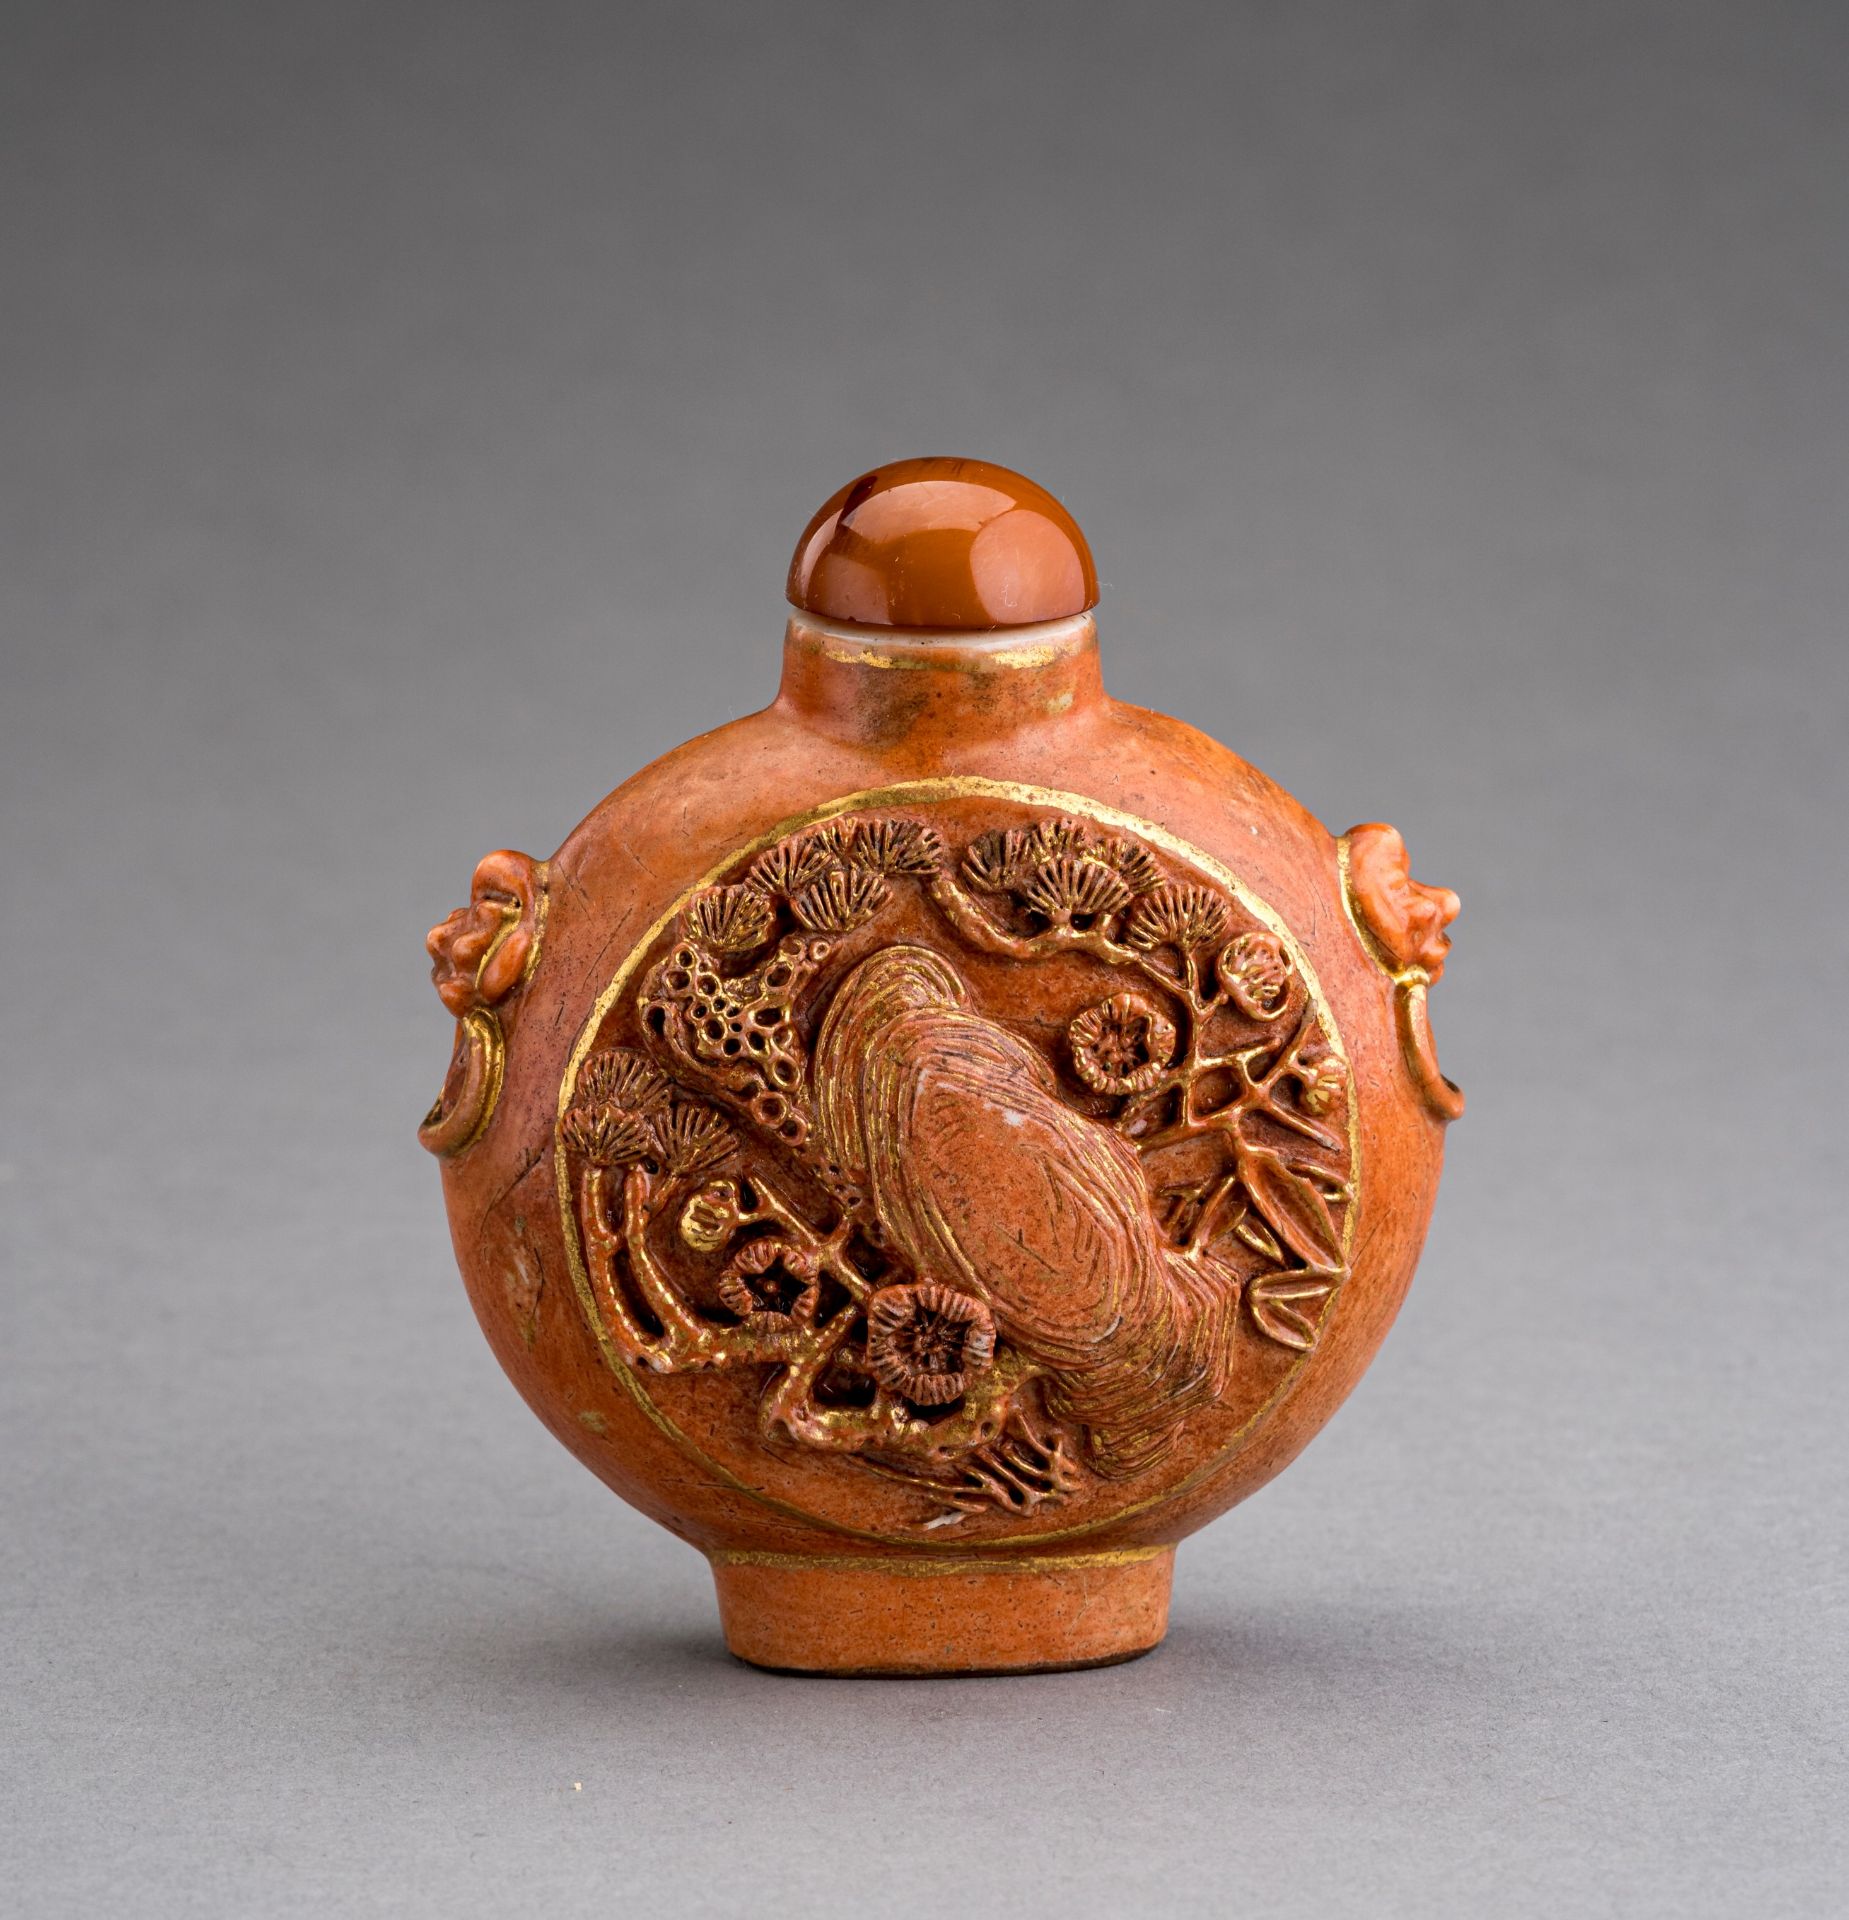 WANG JIEMAI: A LARGE PORCELAIN SNUFF BOTTLE WITH HIGH RELIEF DECORATION